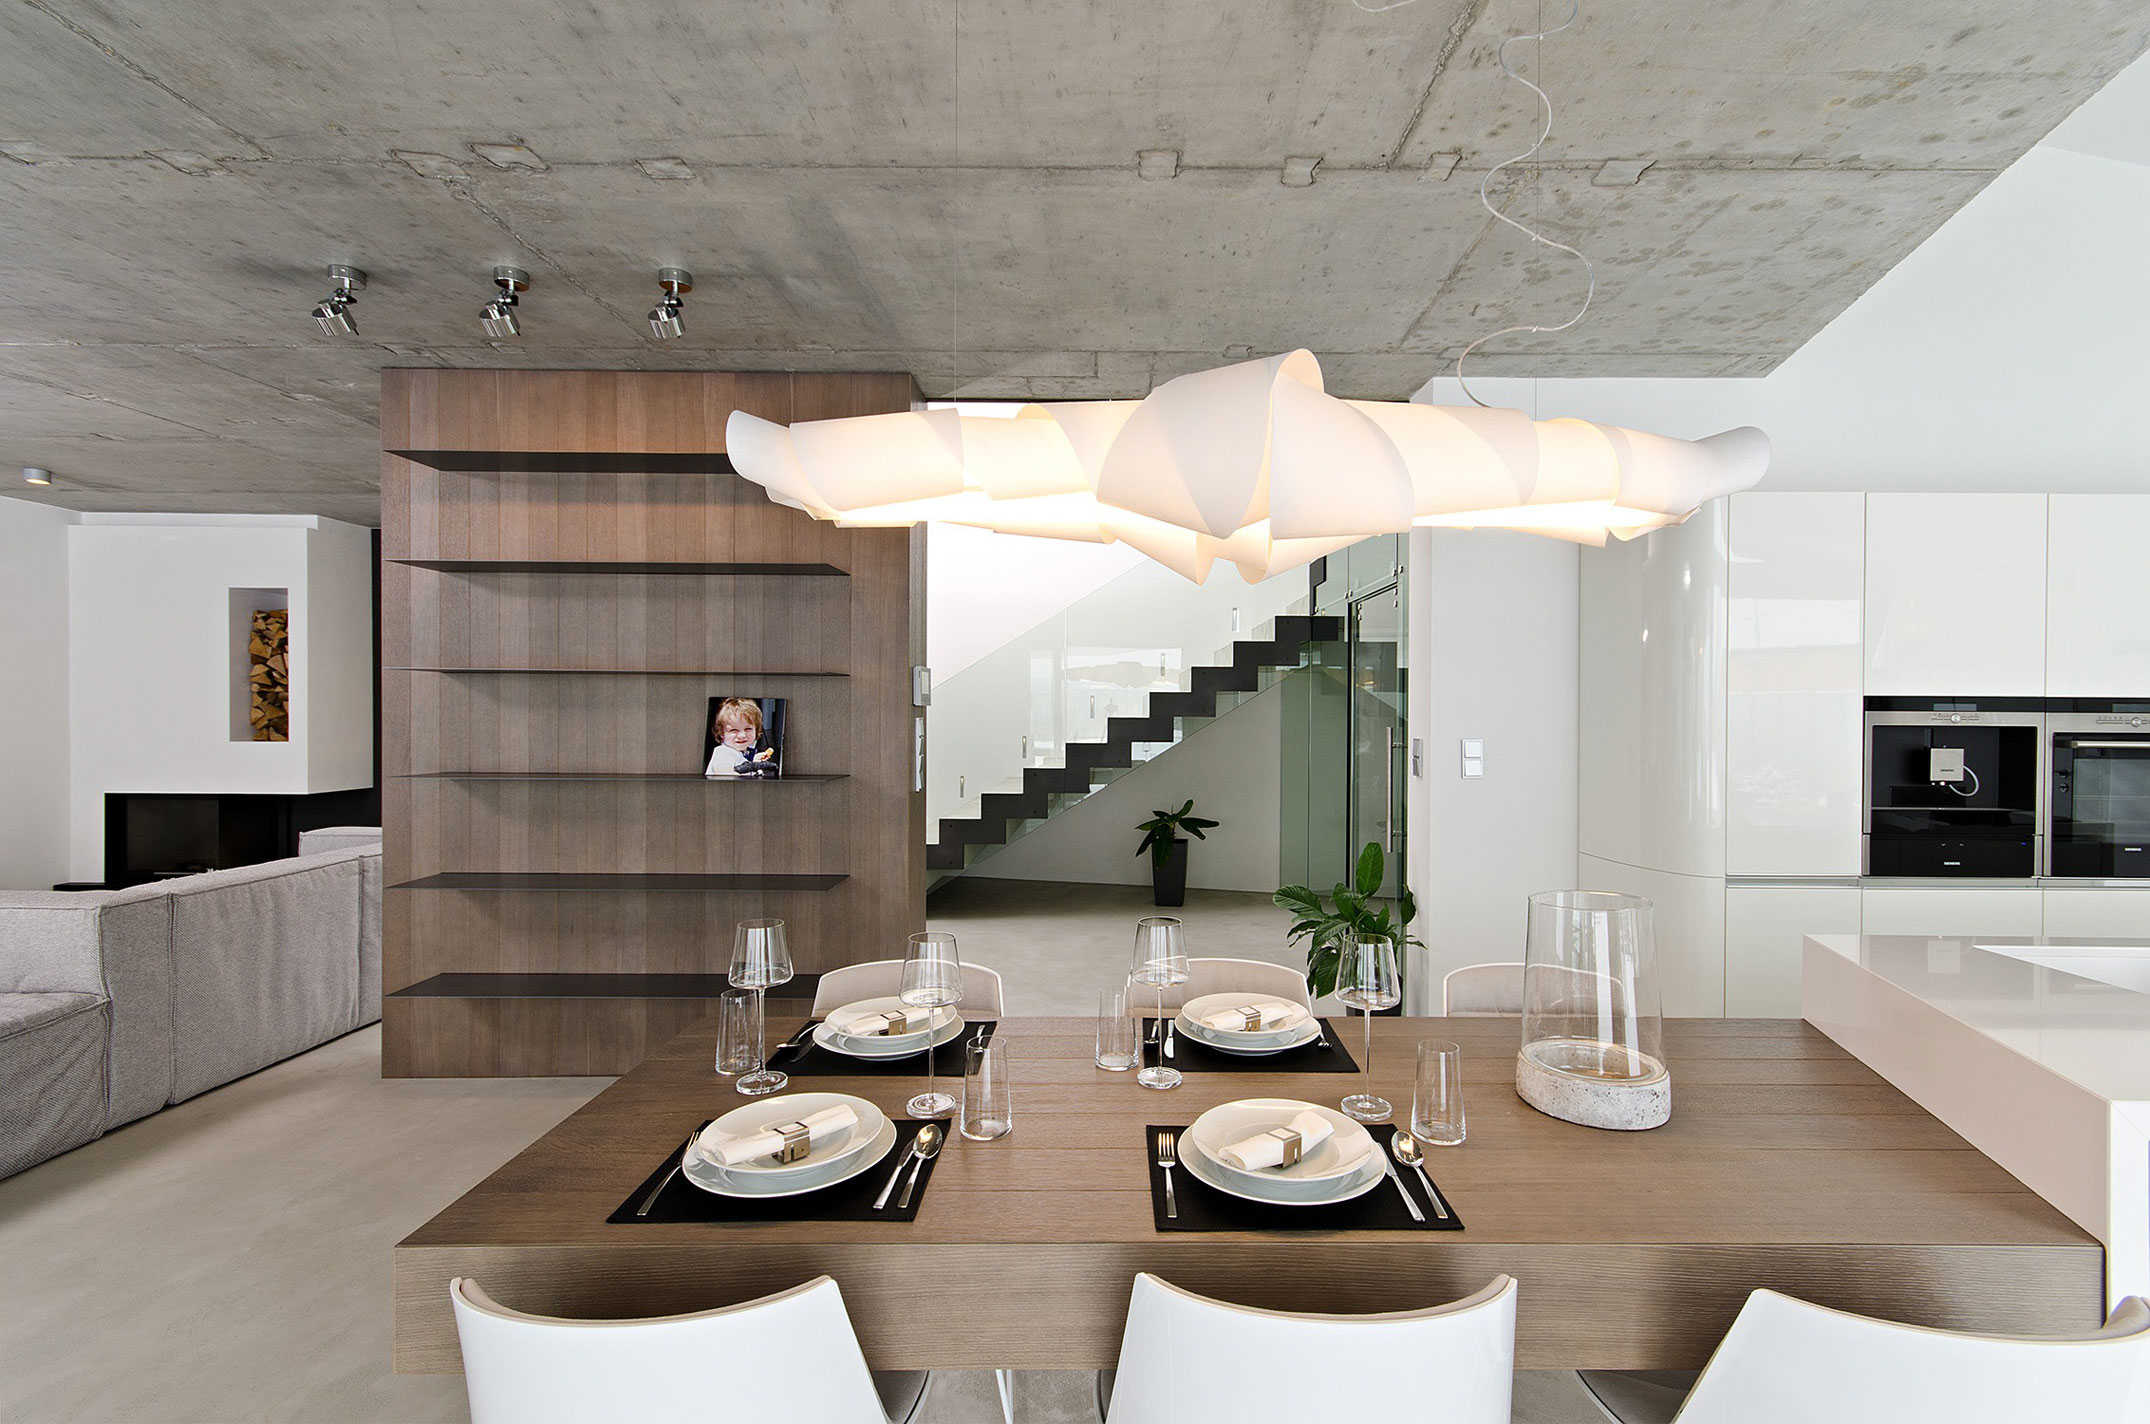 ceiling style with concrete mortar in the room